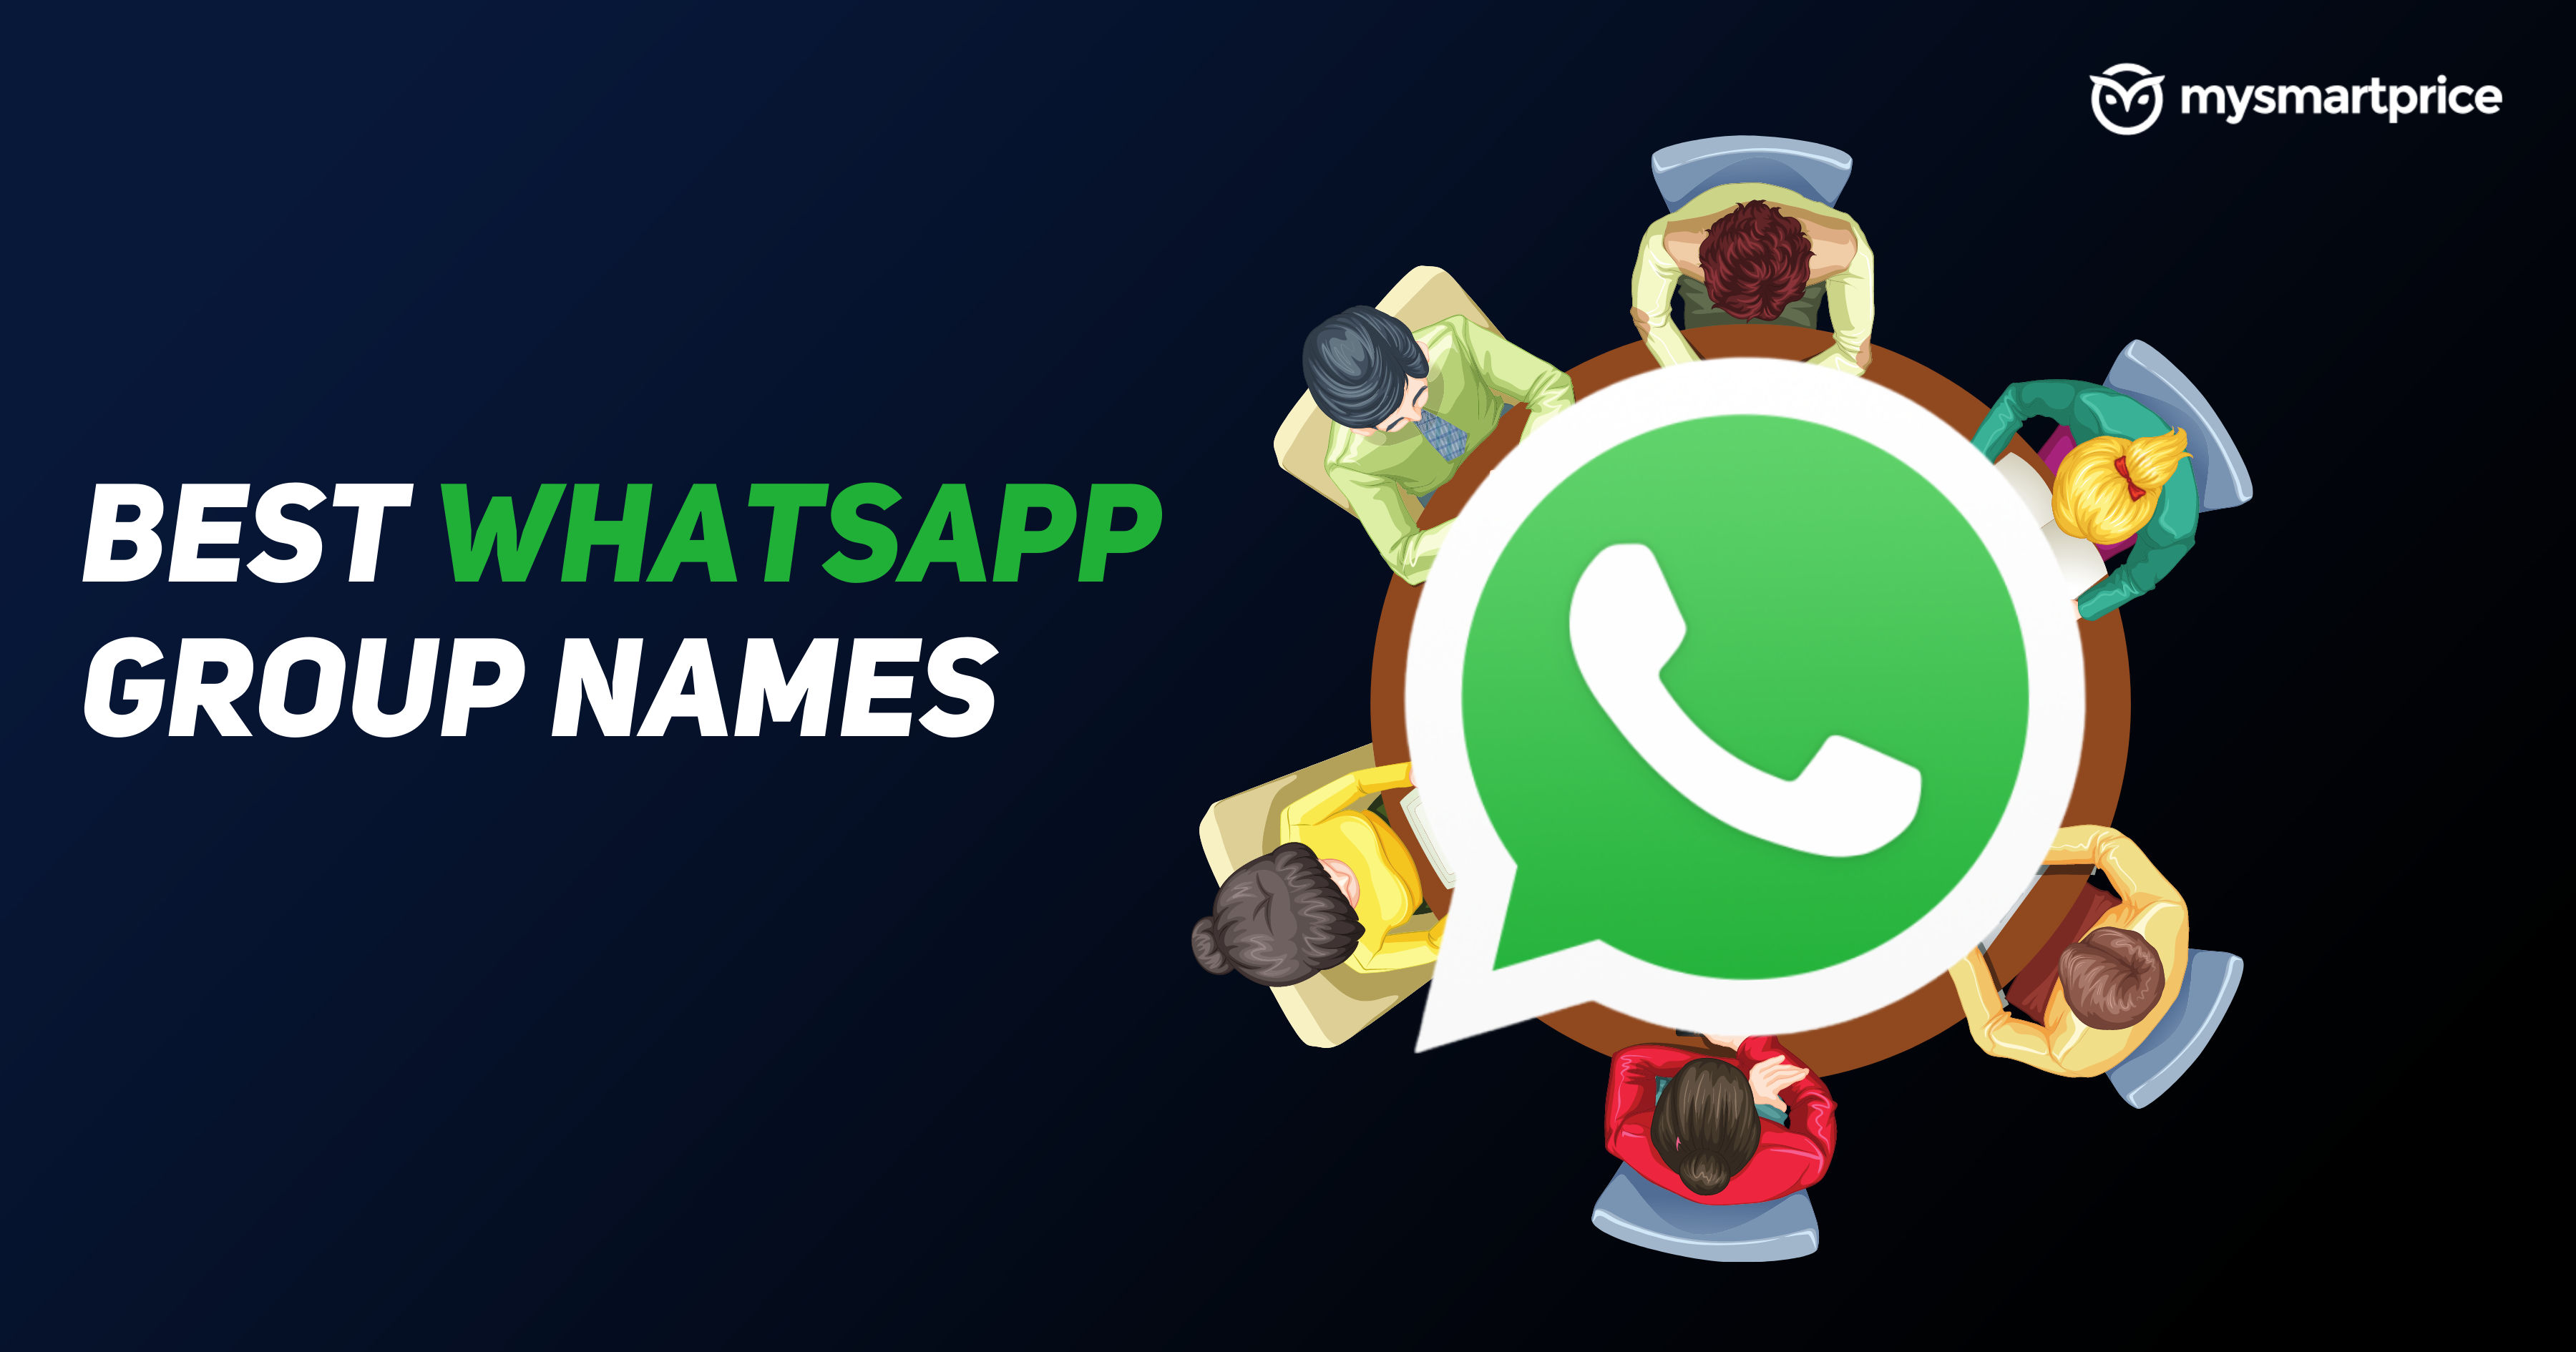 WhatsApp Group Name List: 200+ Best WhatsApp Group Names for Friends,  Family, and More - MySmartPrice